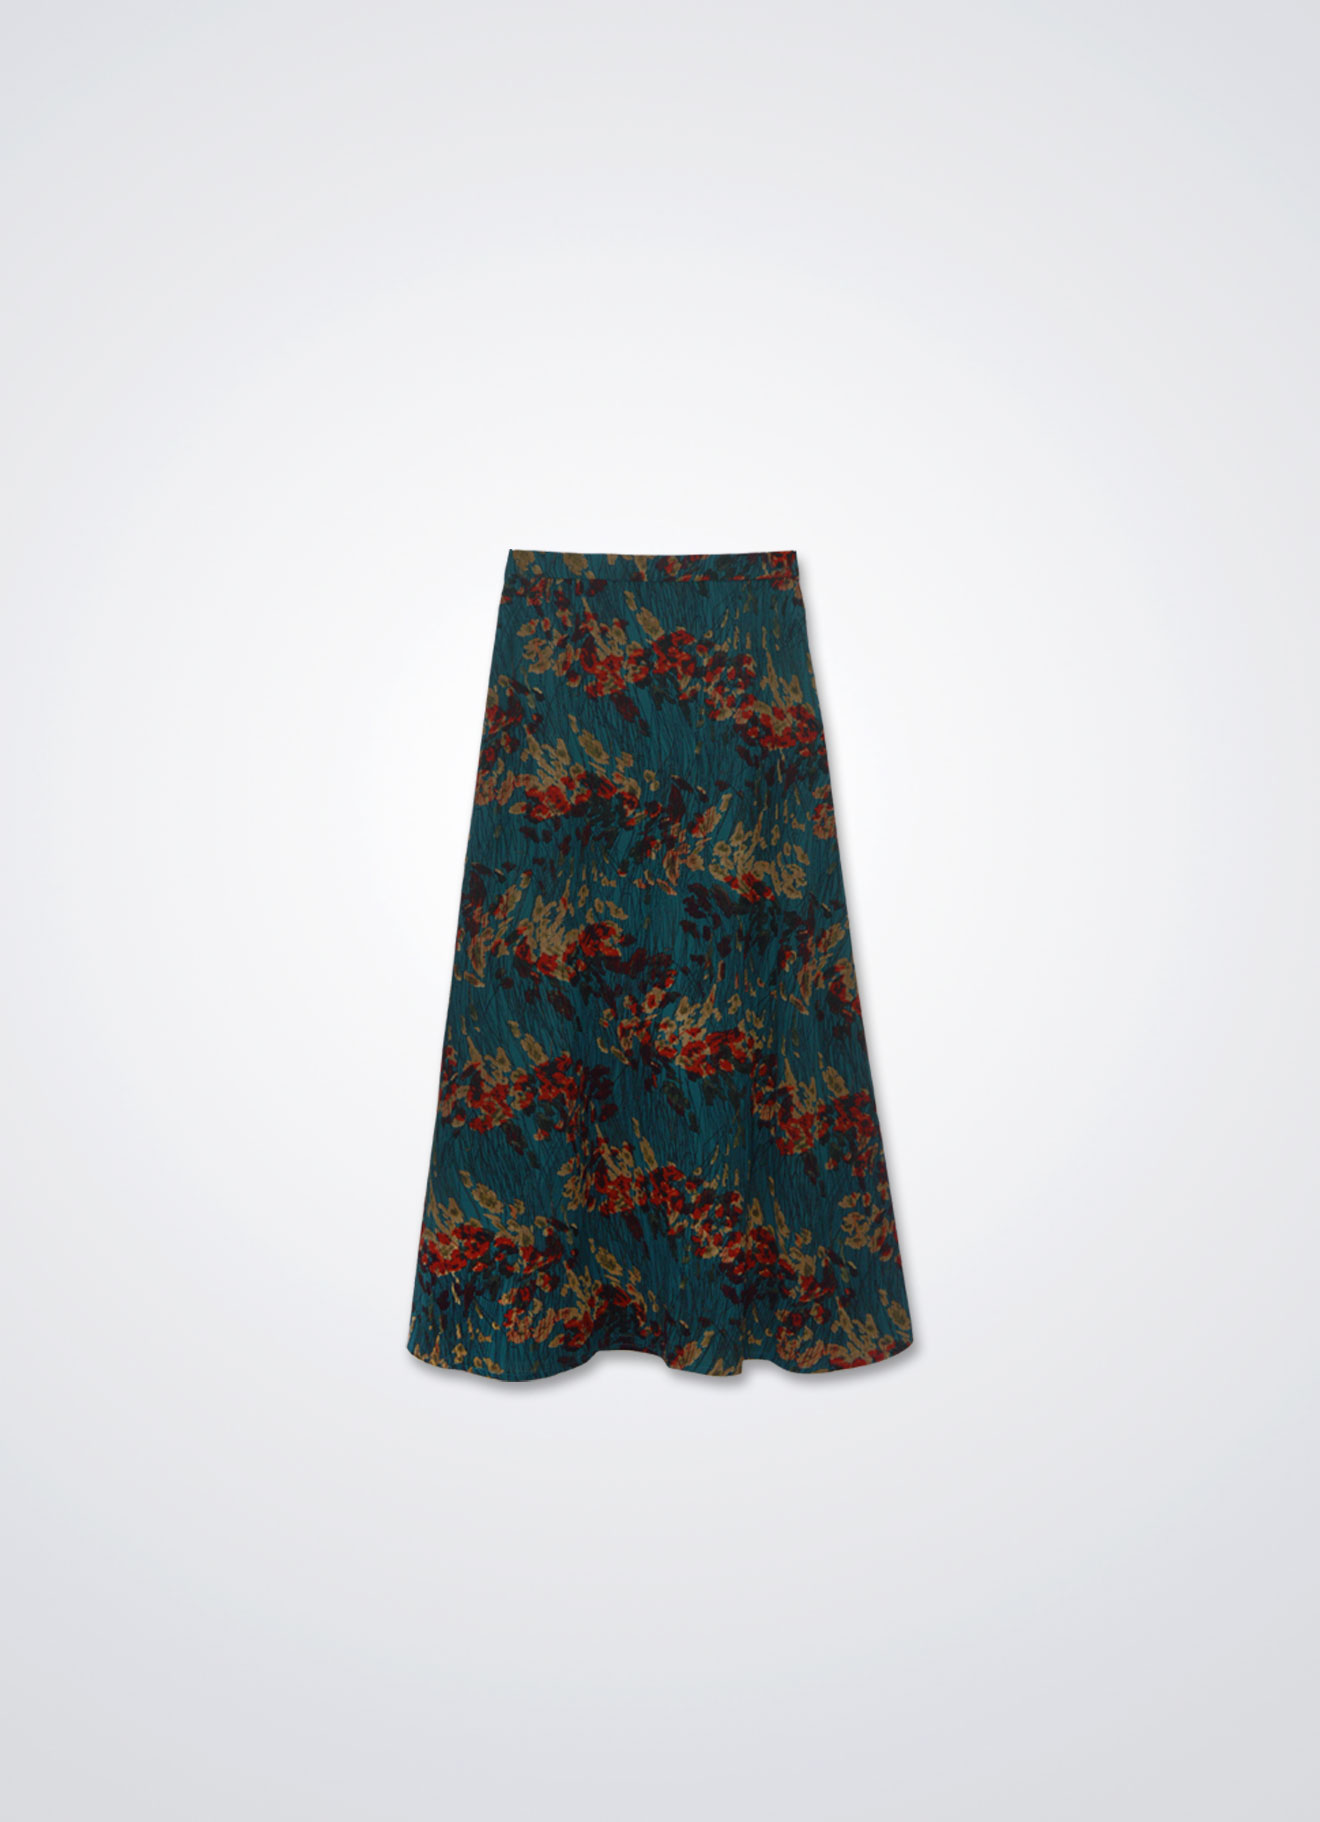 Teal-Green by Printed Skirt